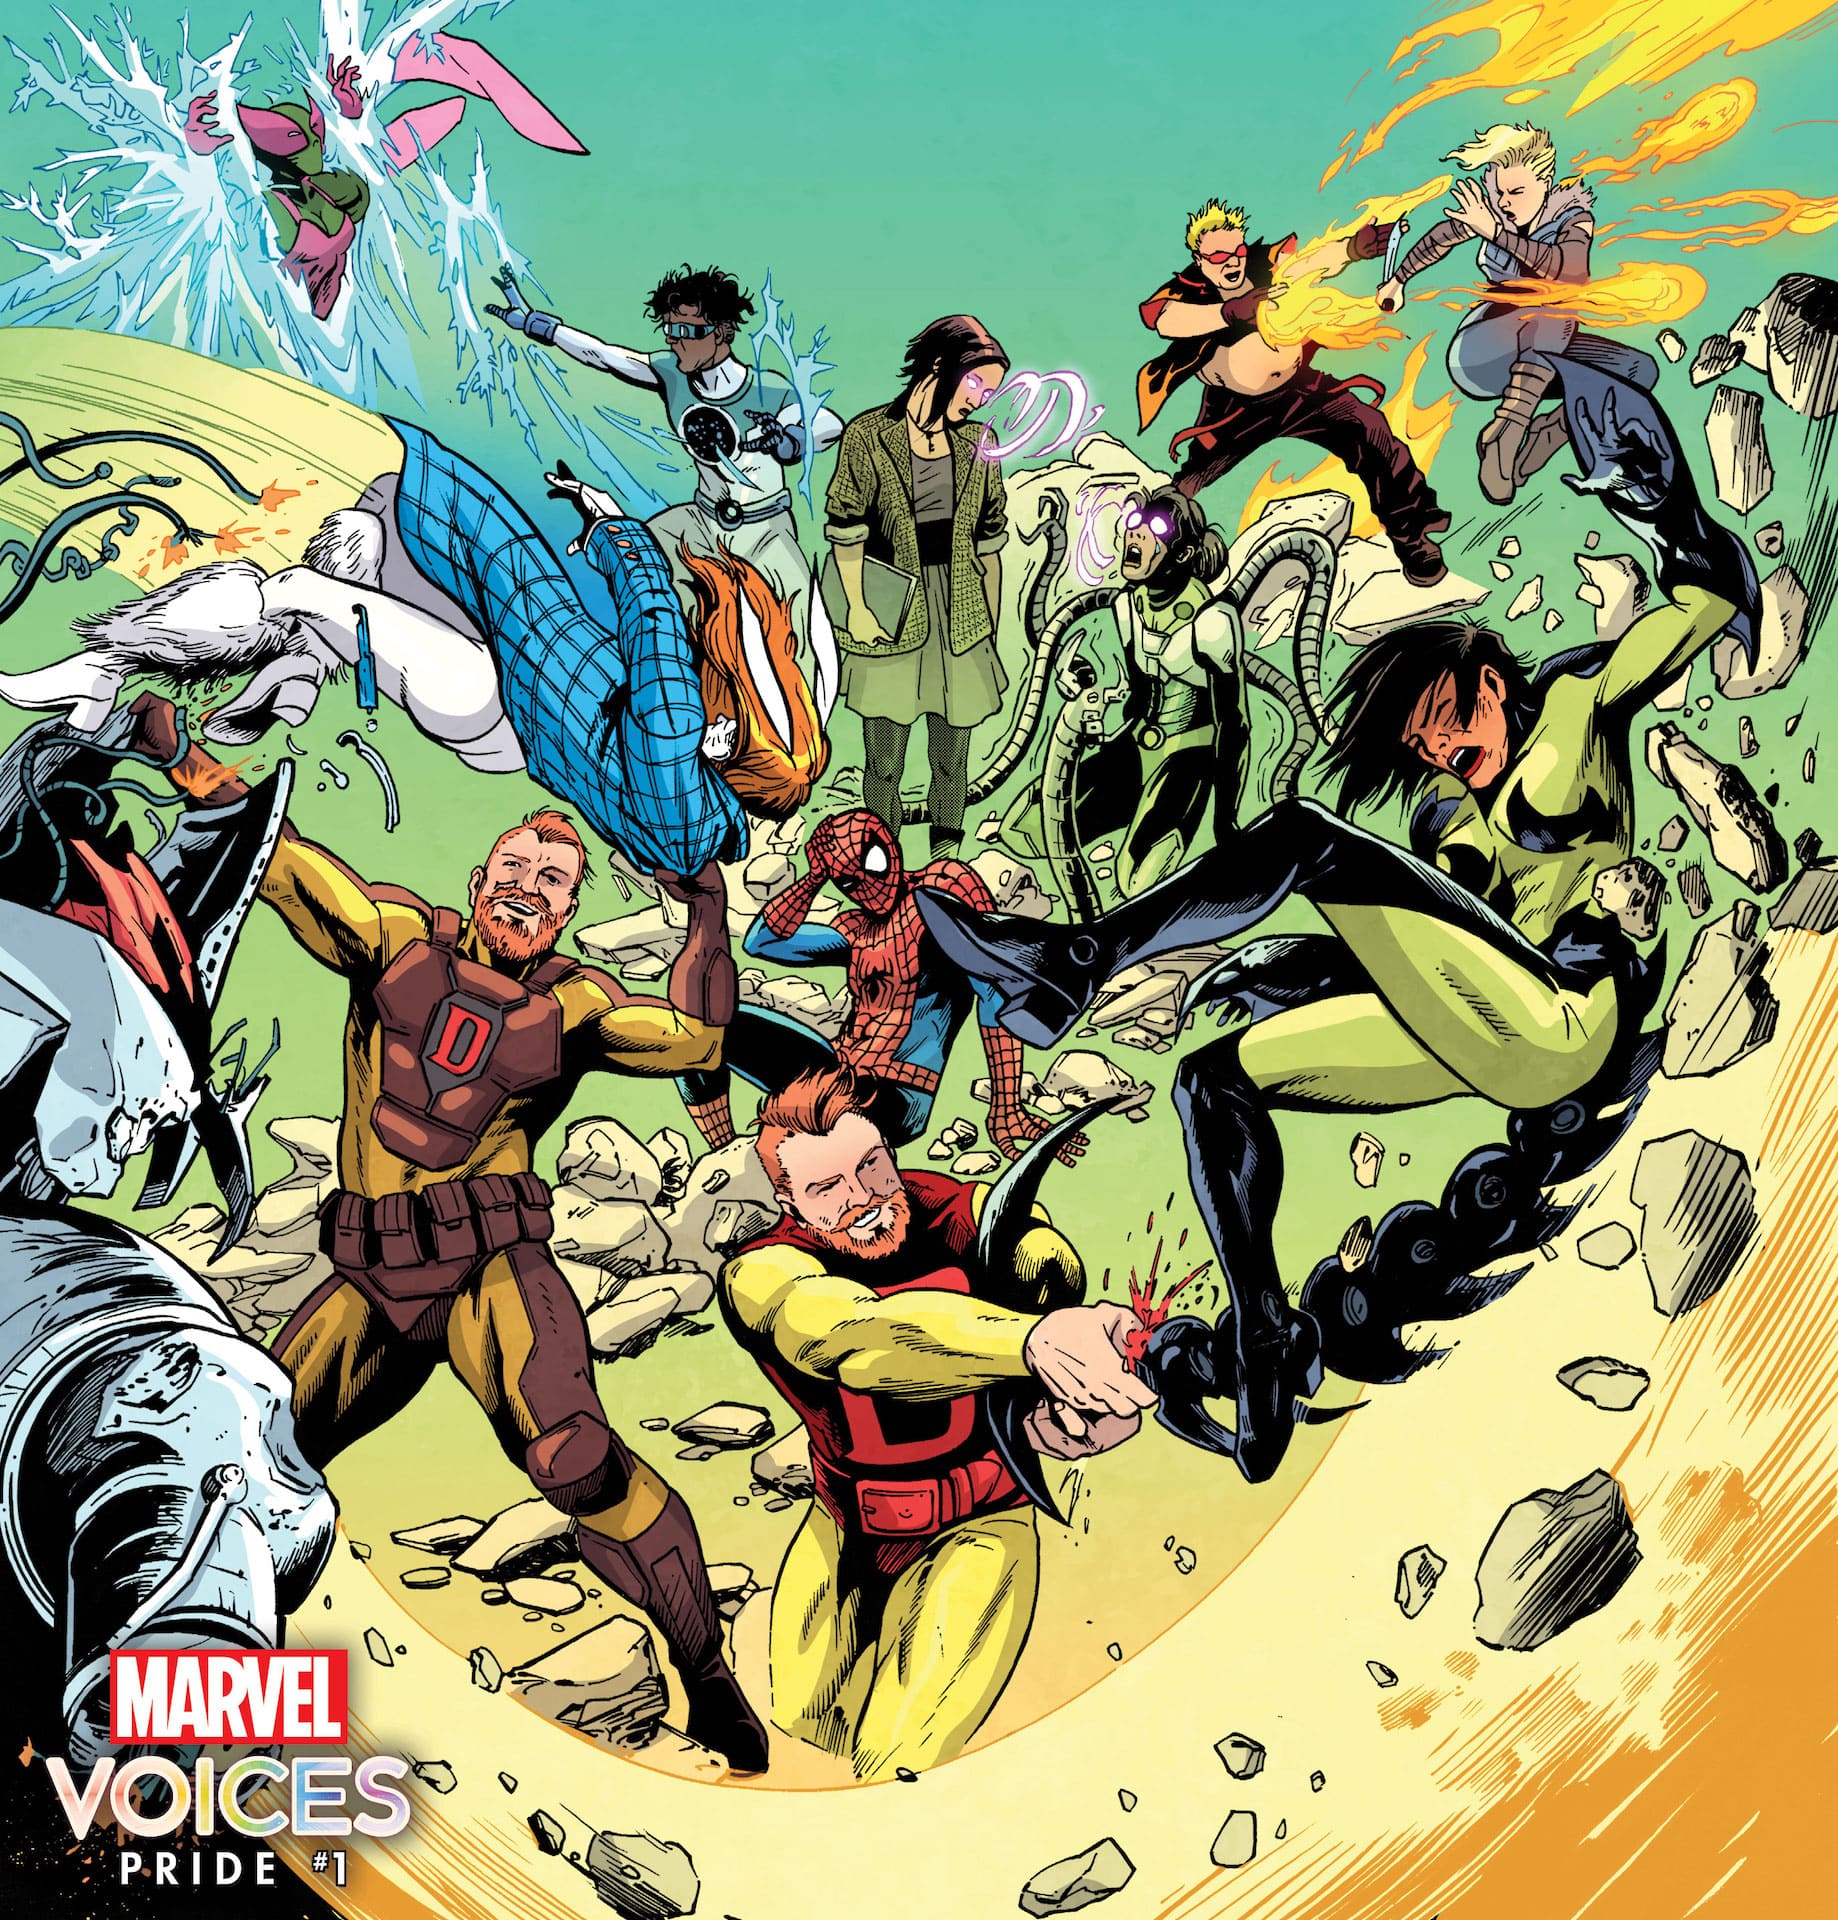 Here's everything you need to know about 'Marvel’s Voices: Pride' #1